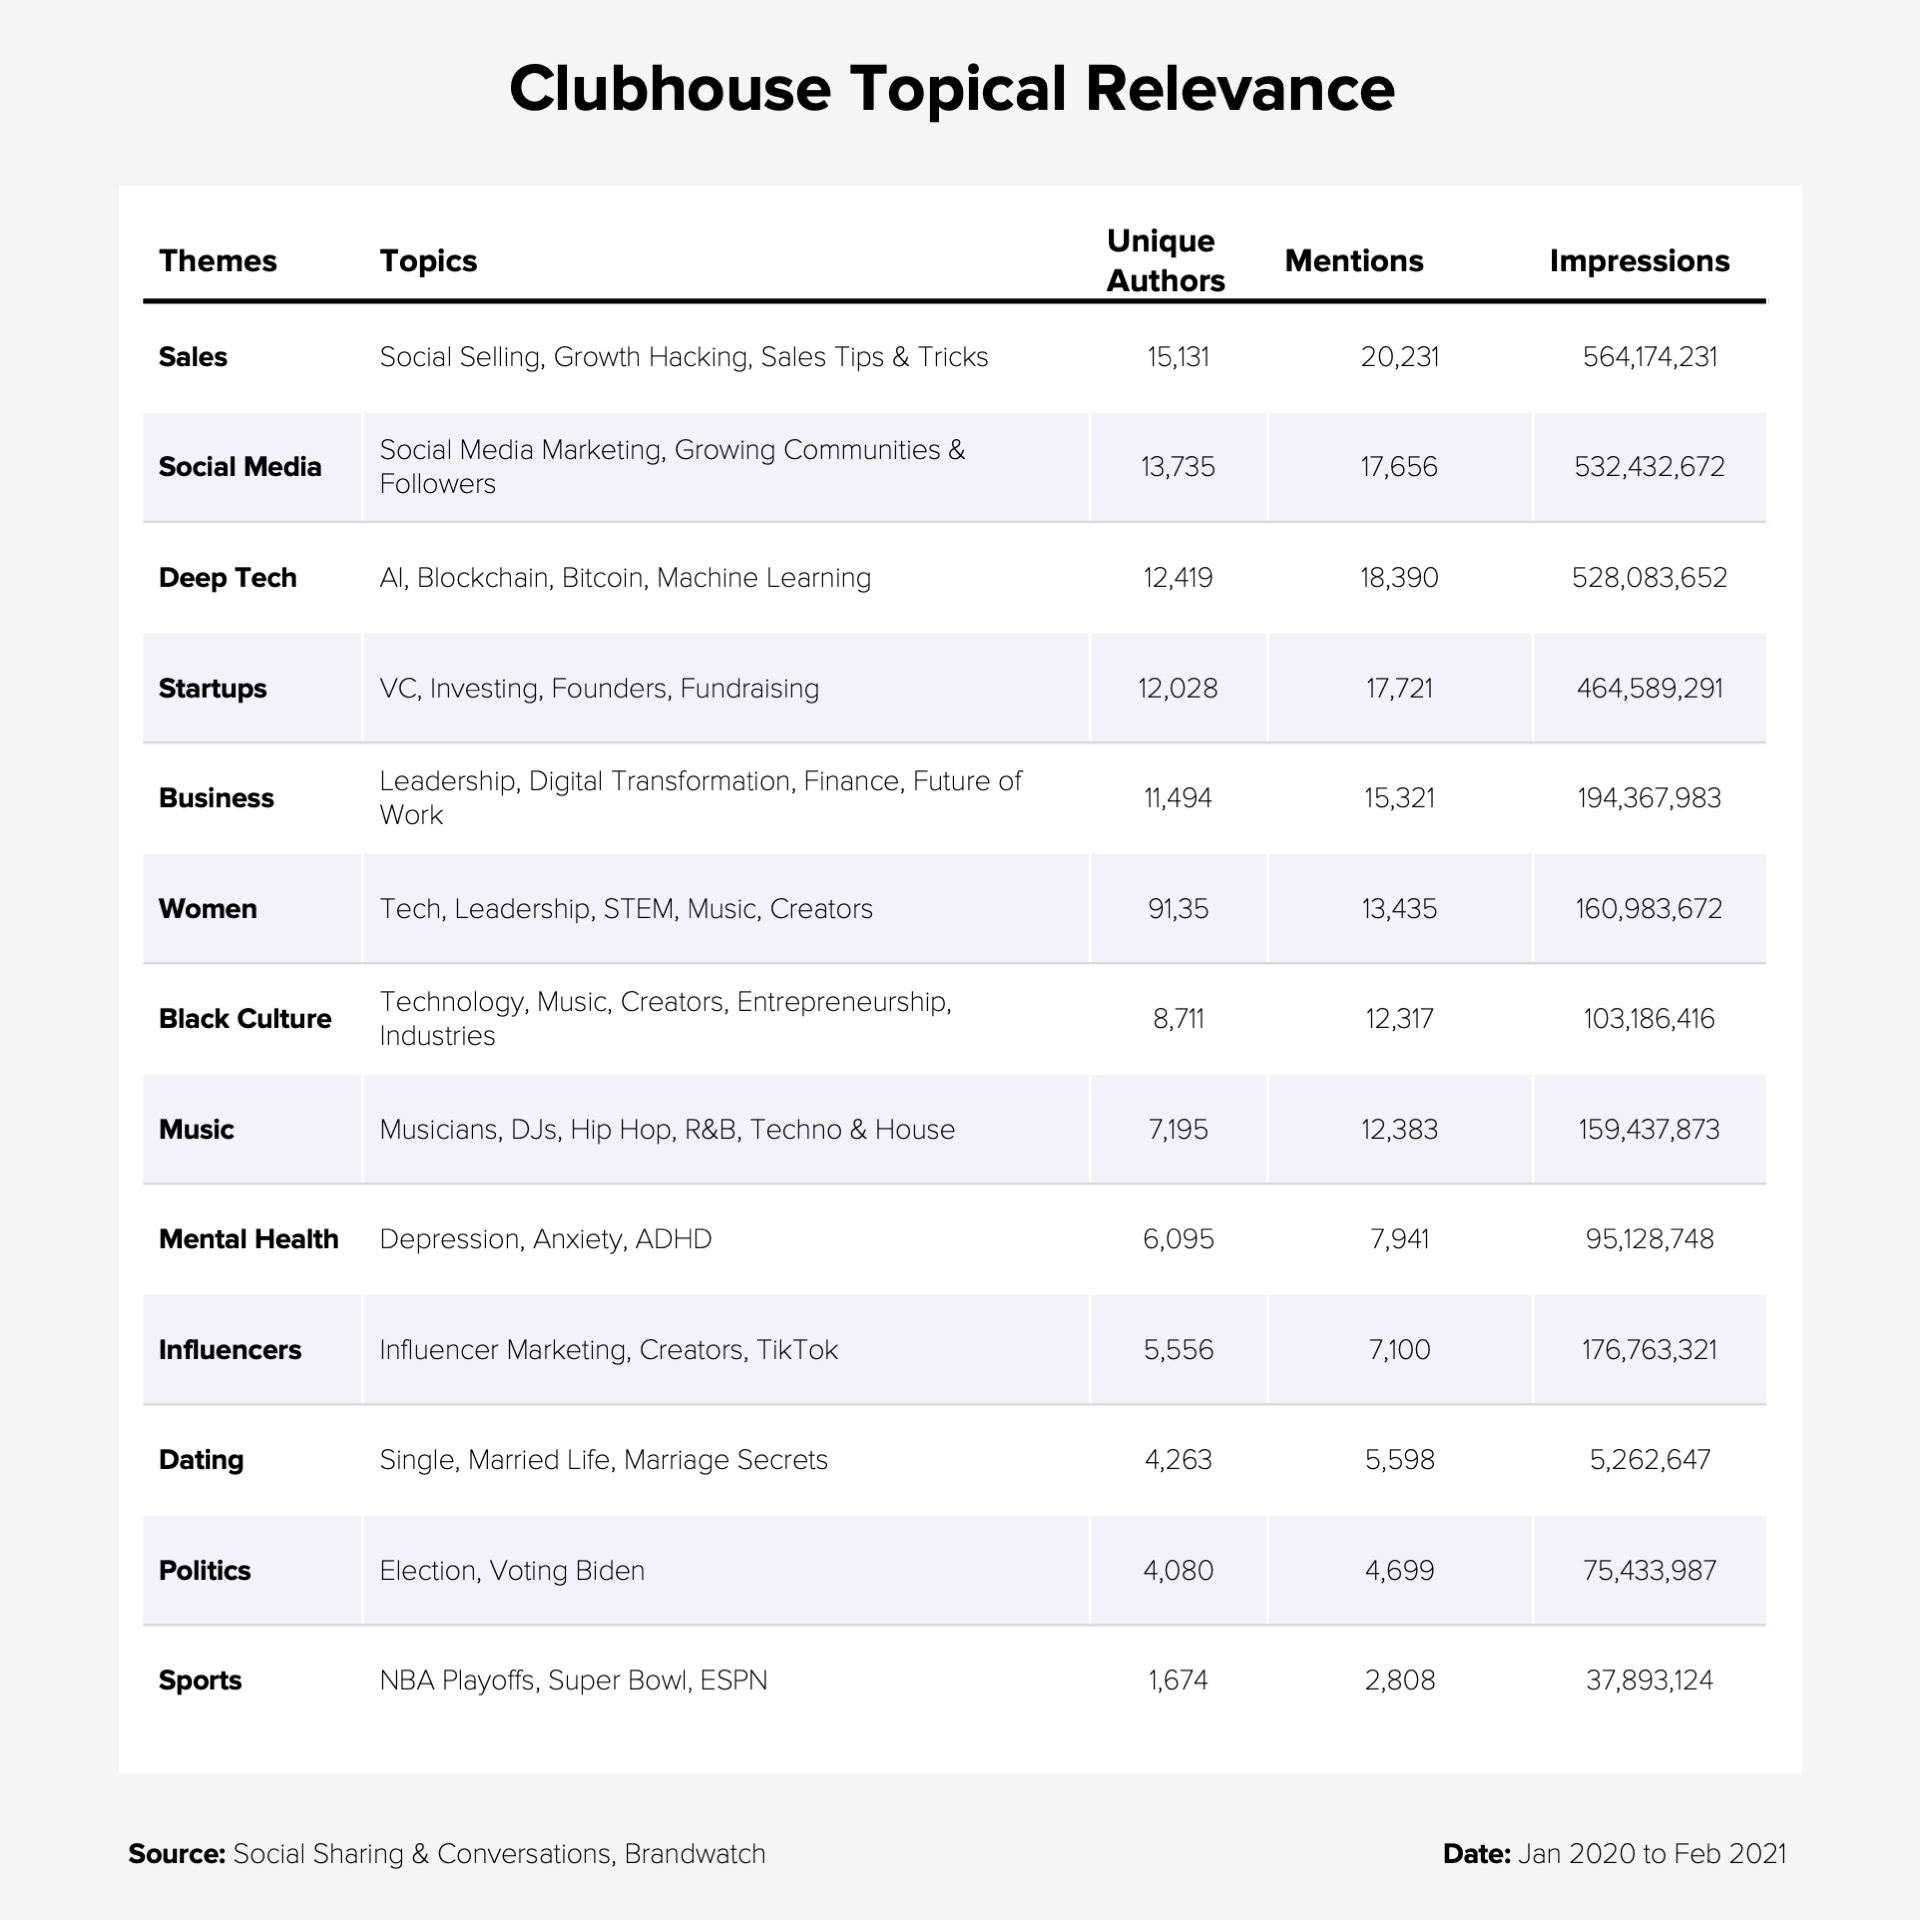 Clubhouse Topics & Themes